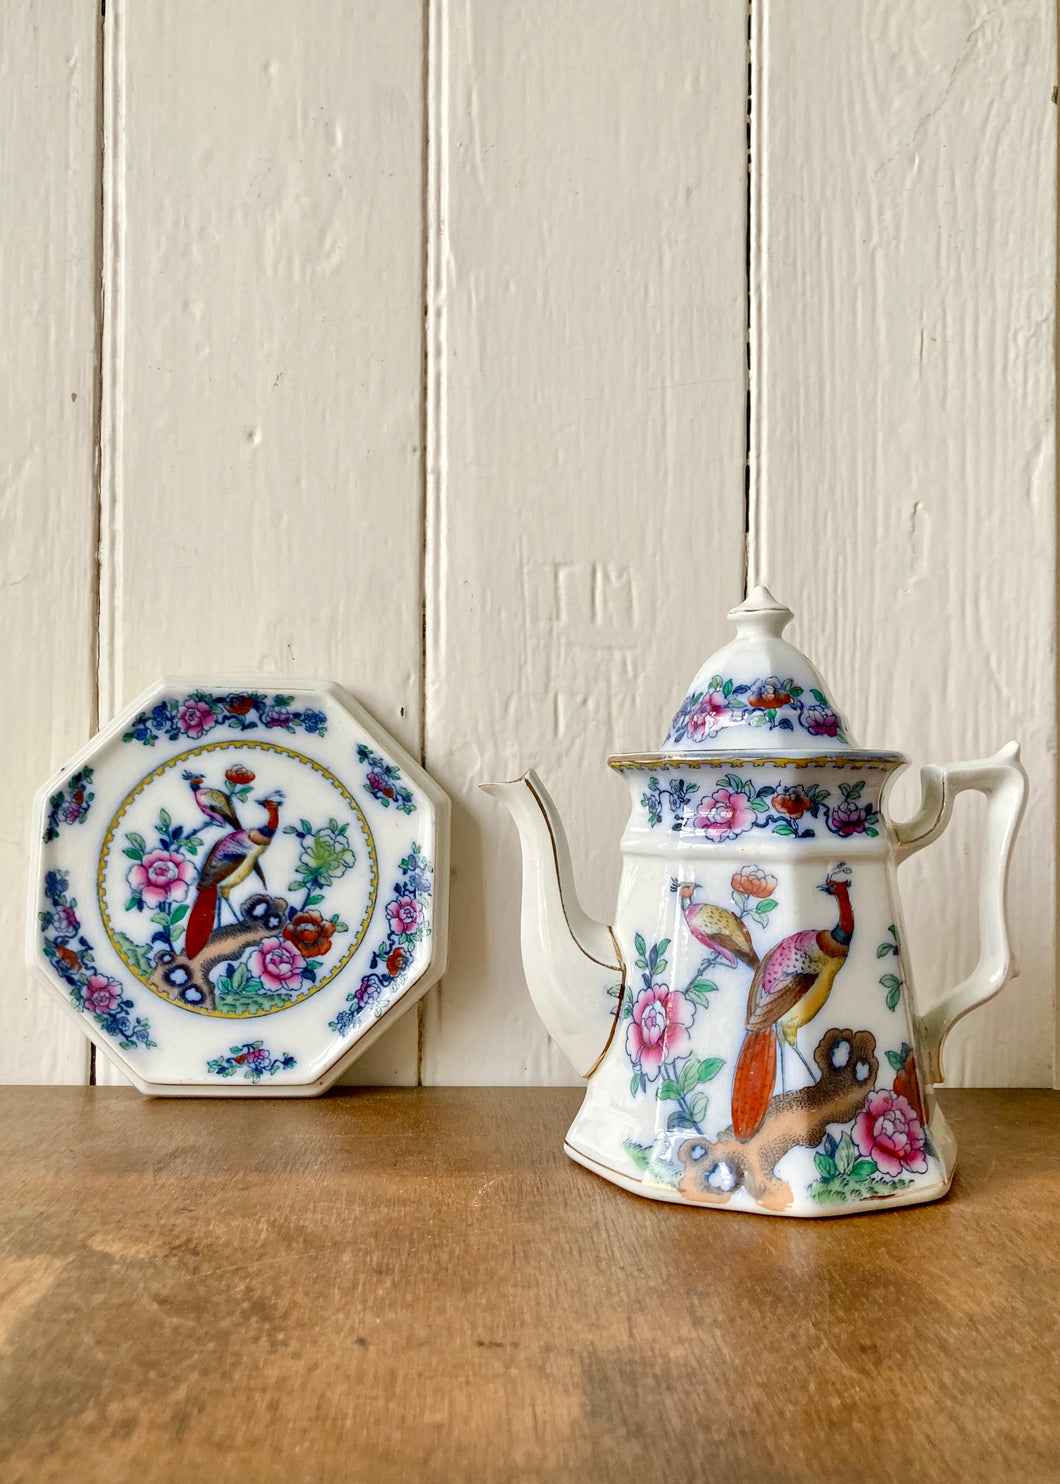 Whieldon Ware, Old Chelsea teapot and stand